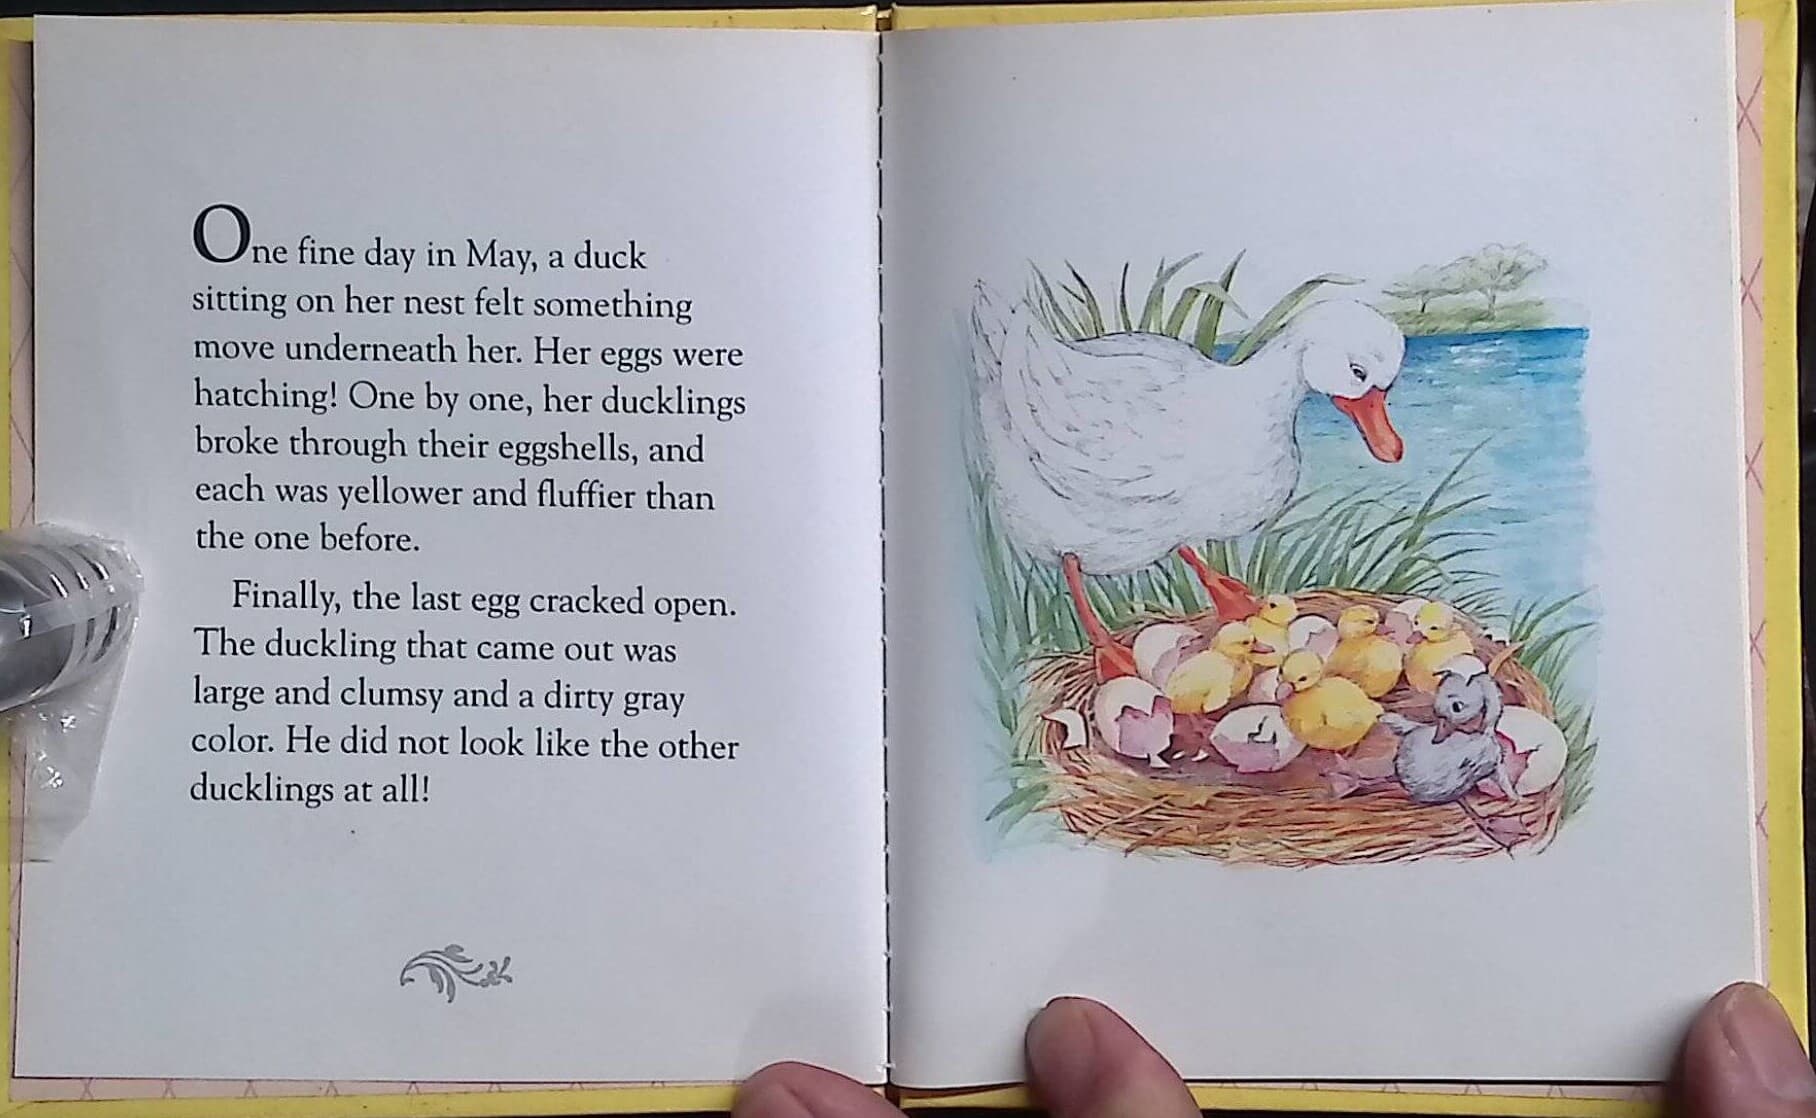 The Ugly Duckling (Fairy Tale Treasury) Hardcover